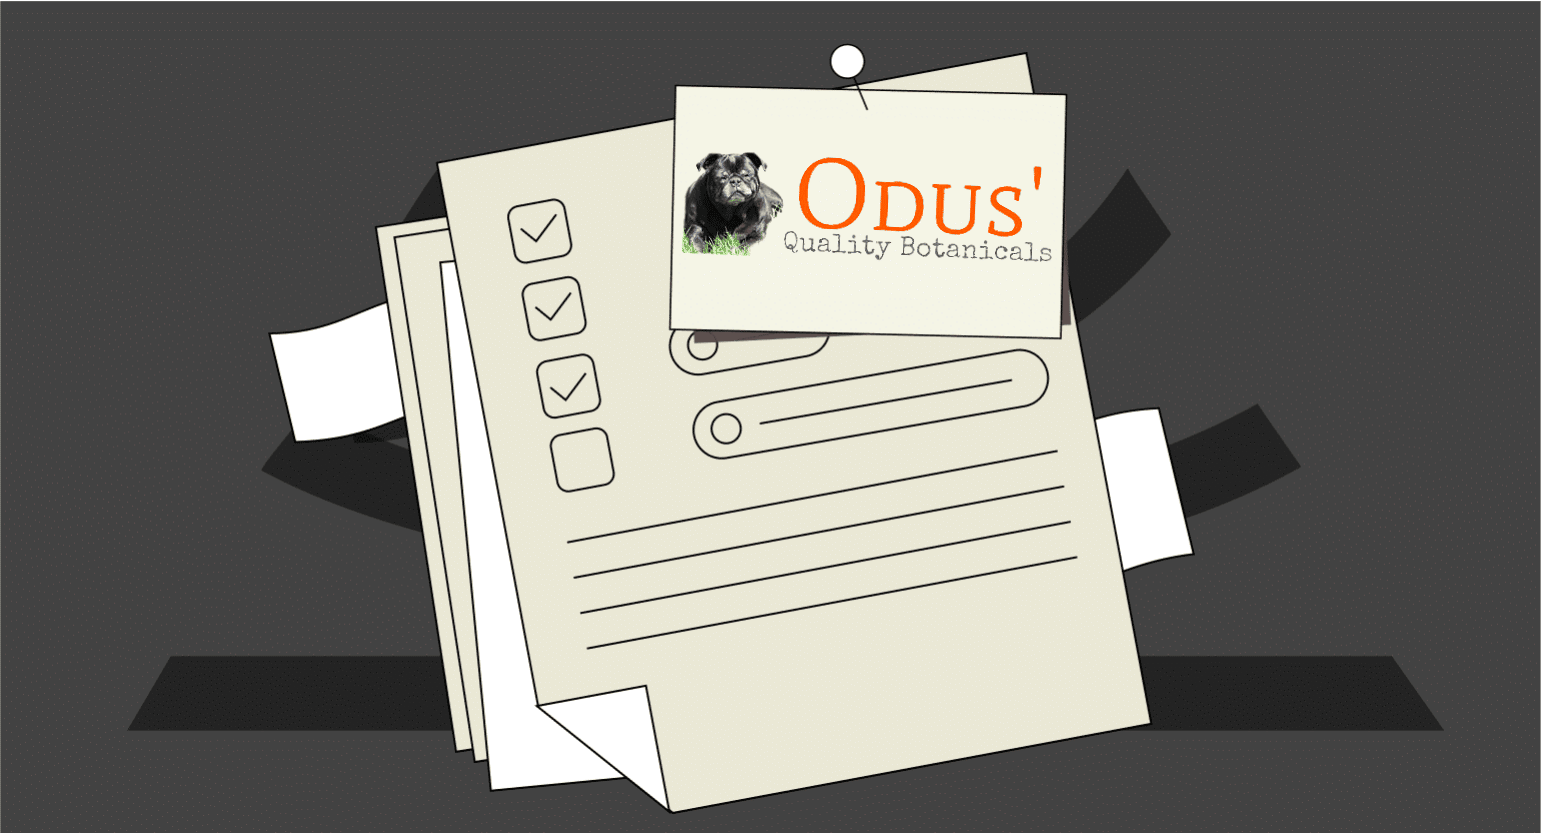 Odus’ Quality Botanicals Review: Product Selection, Safety, & More